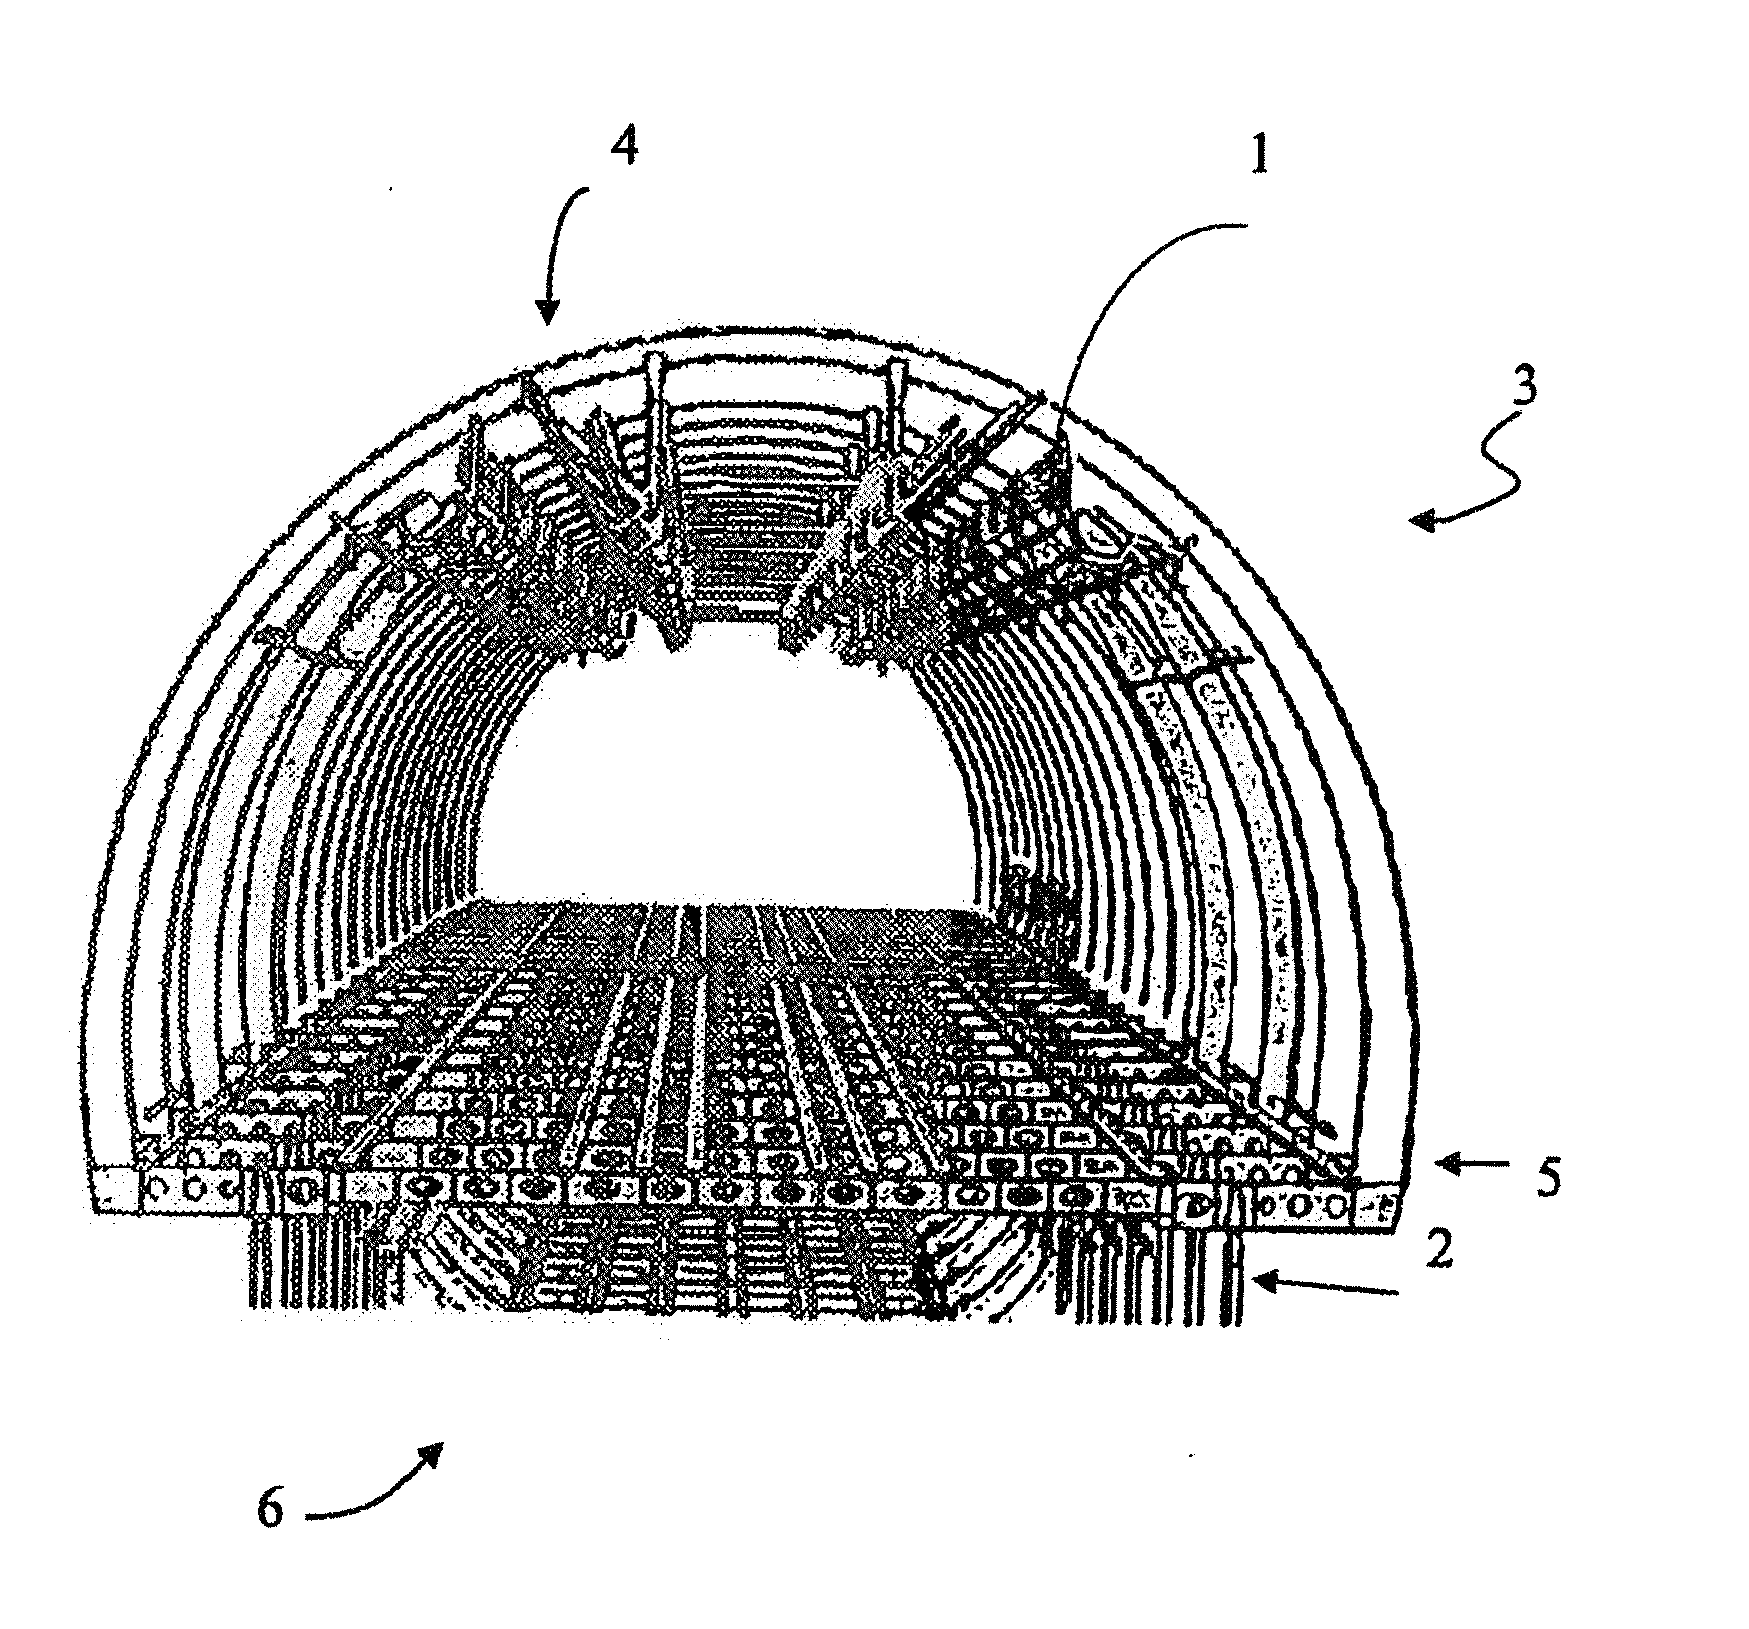 Method And System For Detecting And Locating By Reflectometry Electrical Faults In Metal Structures